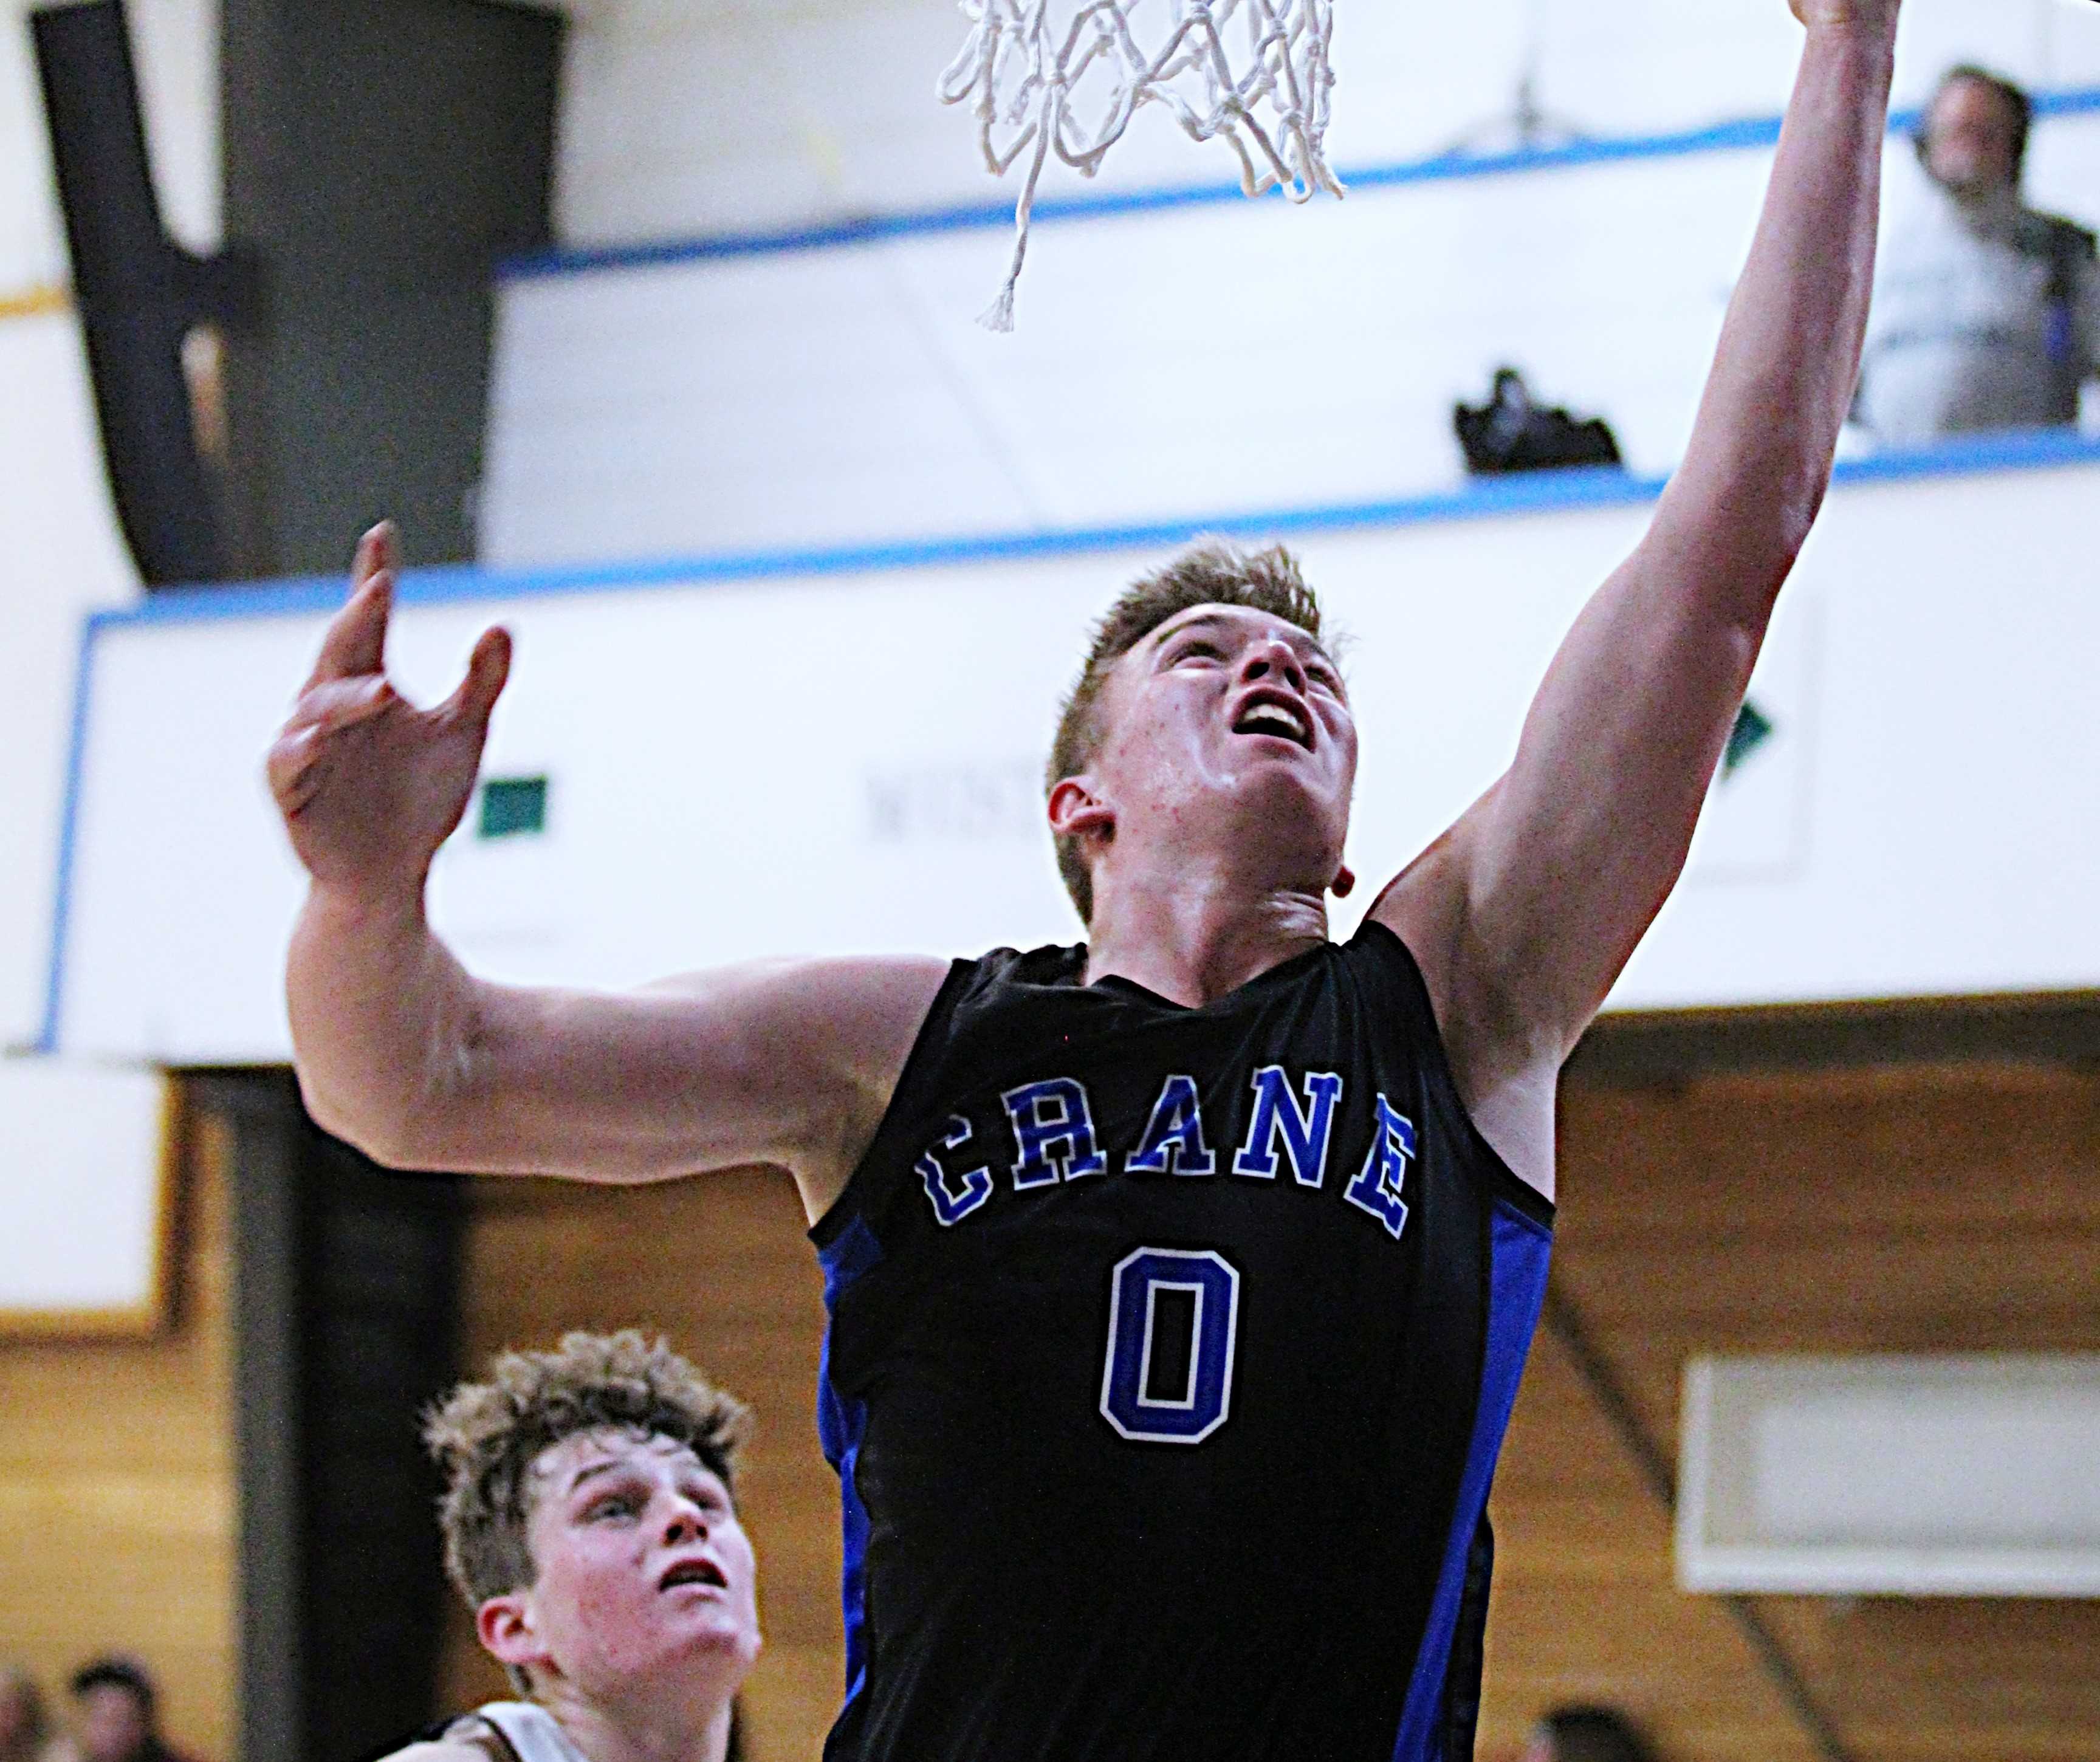 Crane all-state junior Cody Siegner is averaging 20.0 points and 9.7 rebounds this season. (Photo by Debbie Raney)